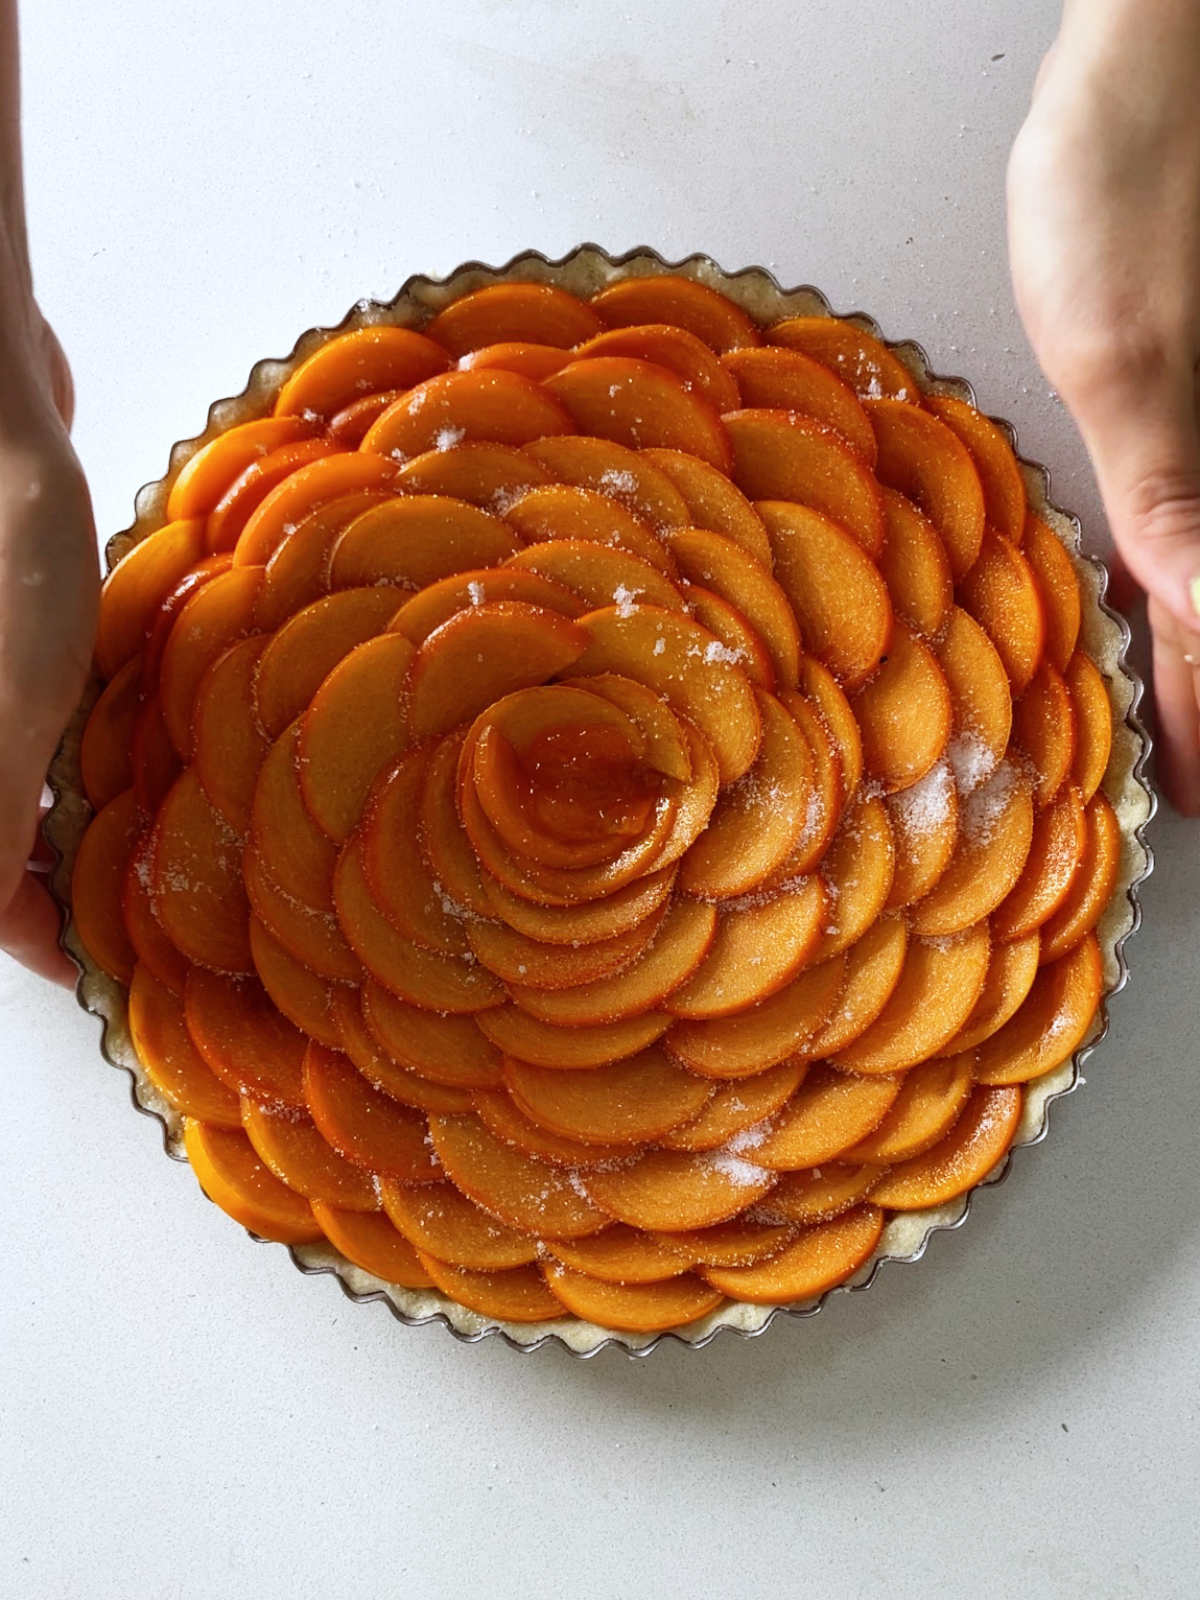 Two hands holding a tart filled with orange fruit arranged in a rose pattern.